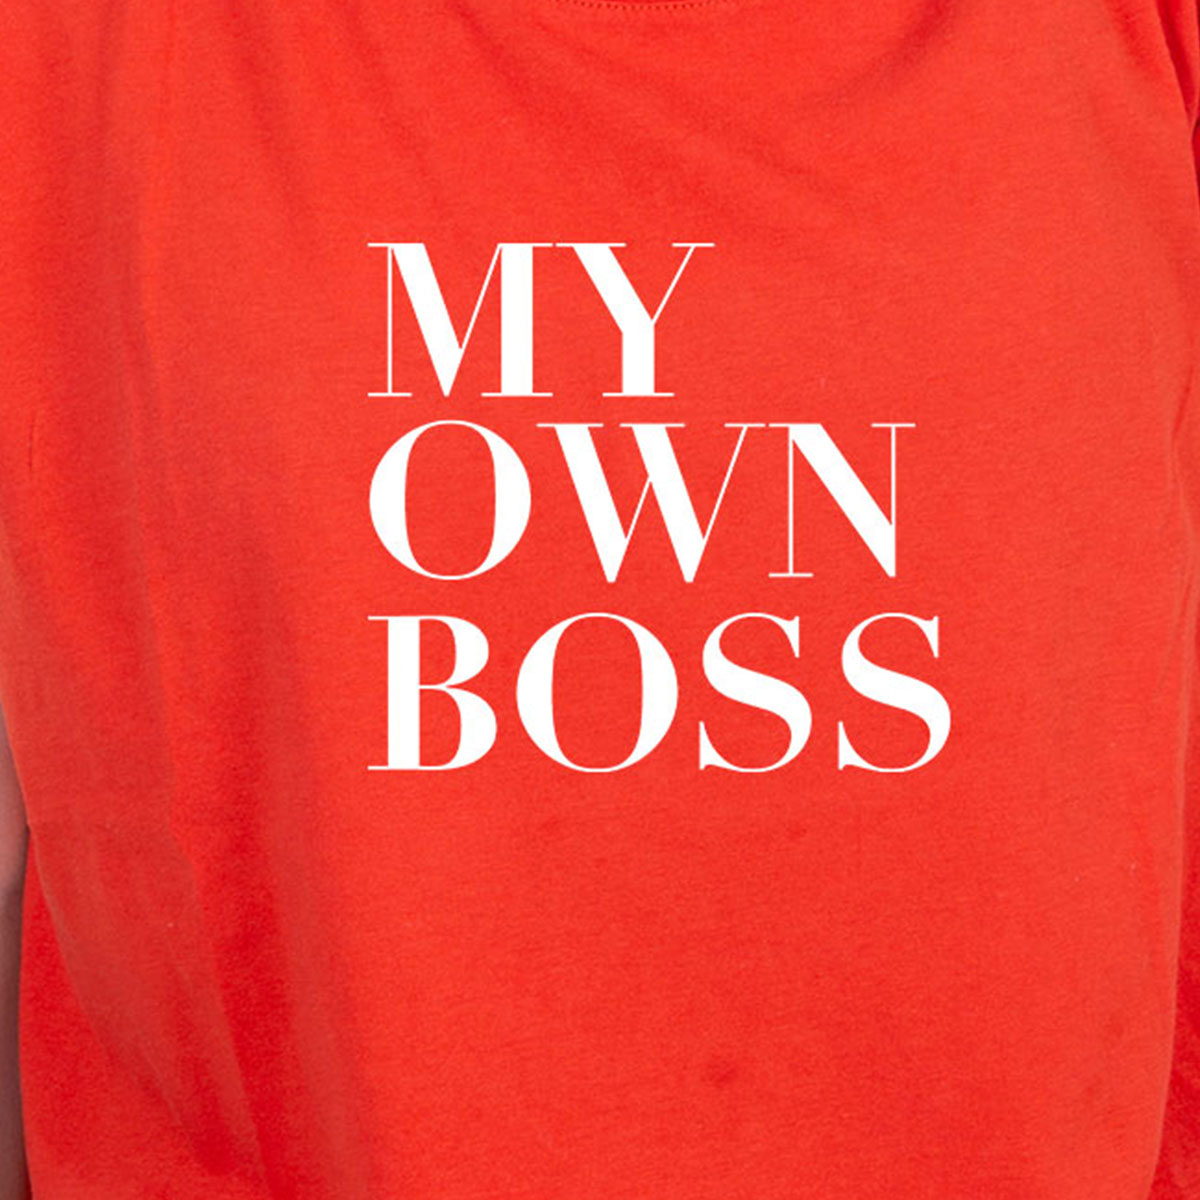 My Own Boss - Printed Cotton T- Shirt - Red